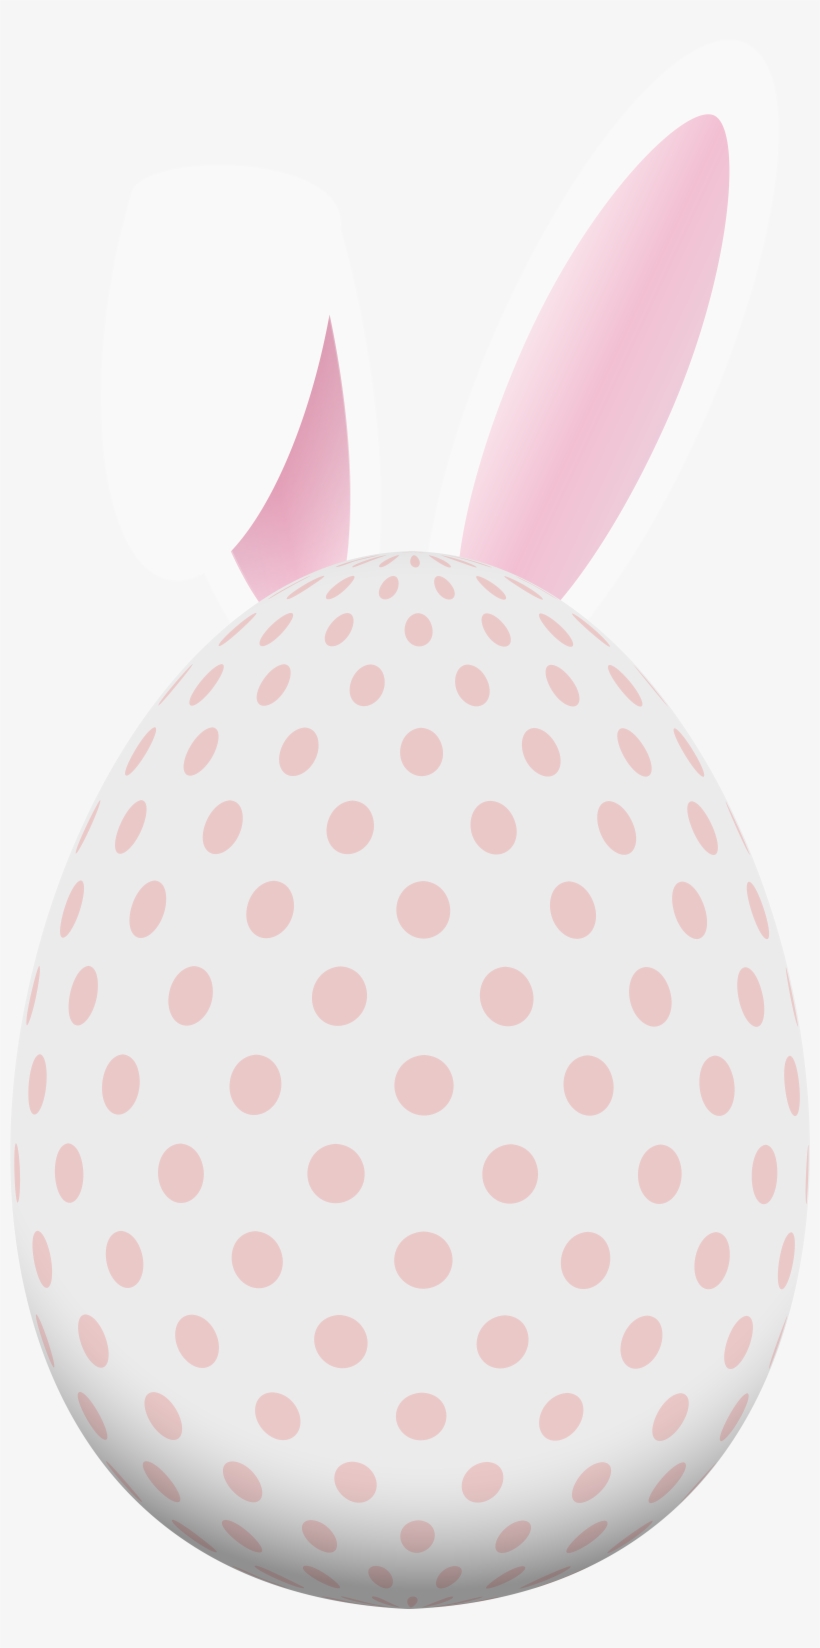 Bunny Png Egg With Clip Royalty Free - Easter Egg With Bunny Ears Clipart, transparent png #167543